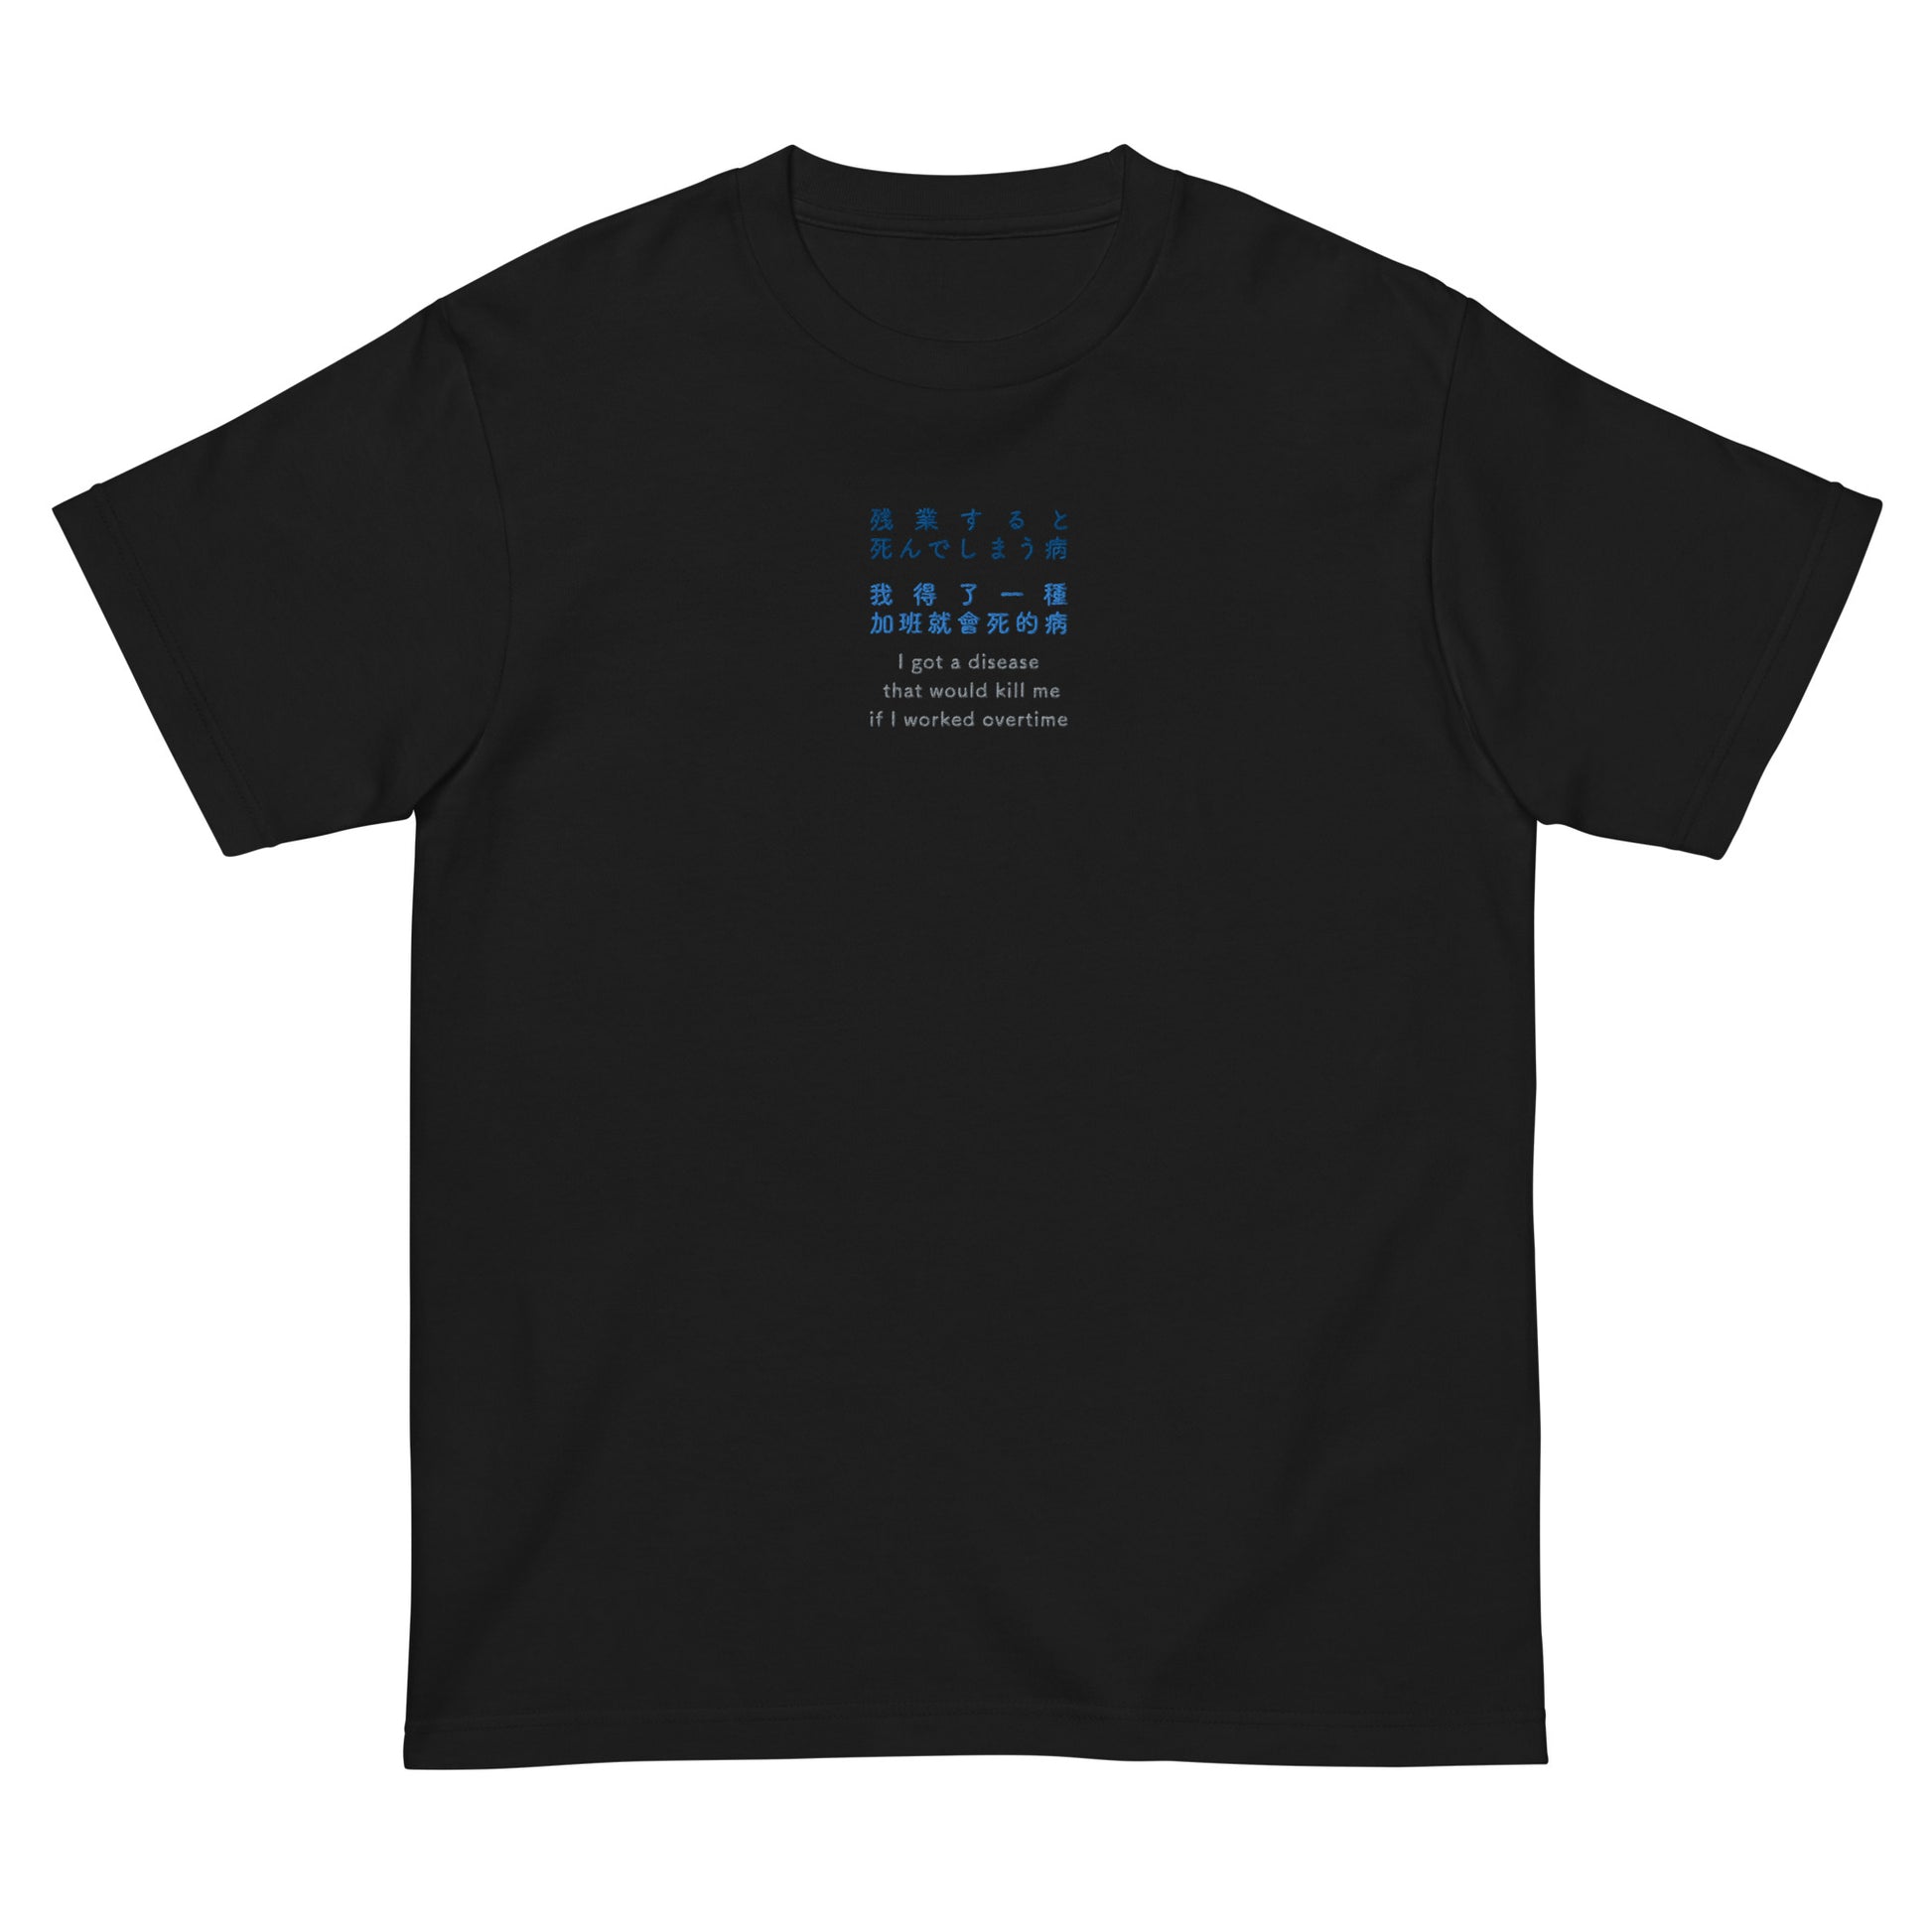 Black High Quality Tee - Front Design with an Navy, Light Blue, Gray Embroidery "i got a disease that would kill me if i worked overtime" in Japanese,Chinese and English